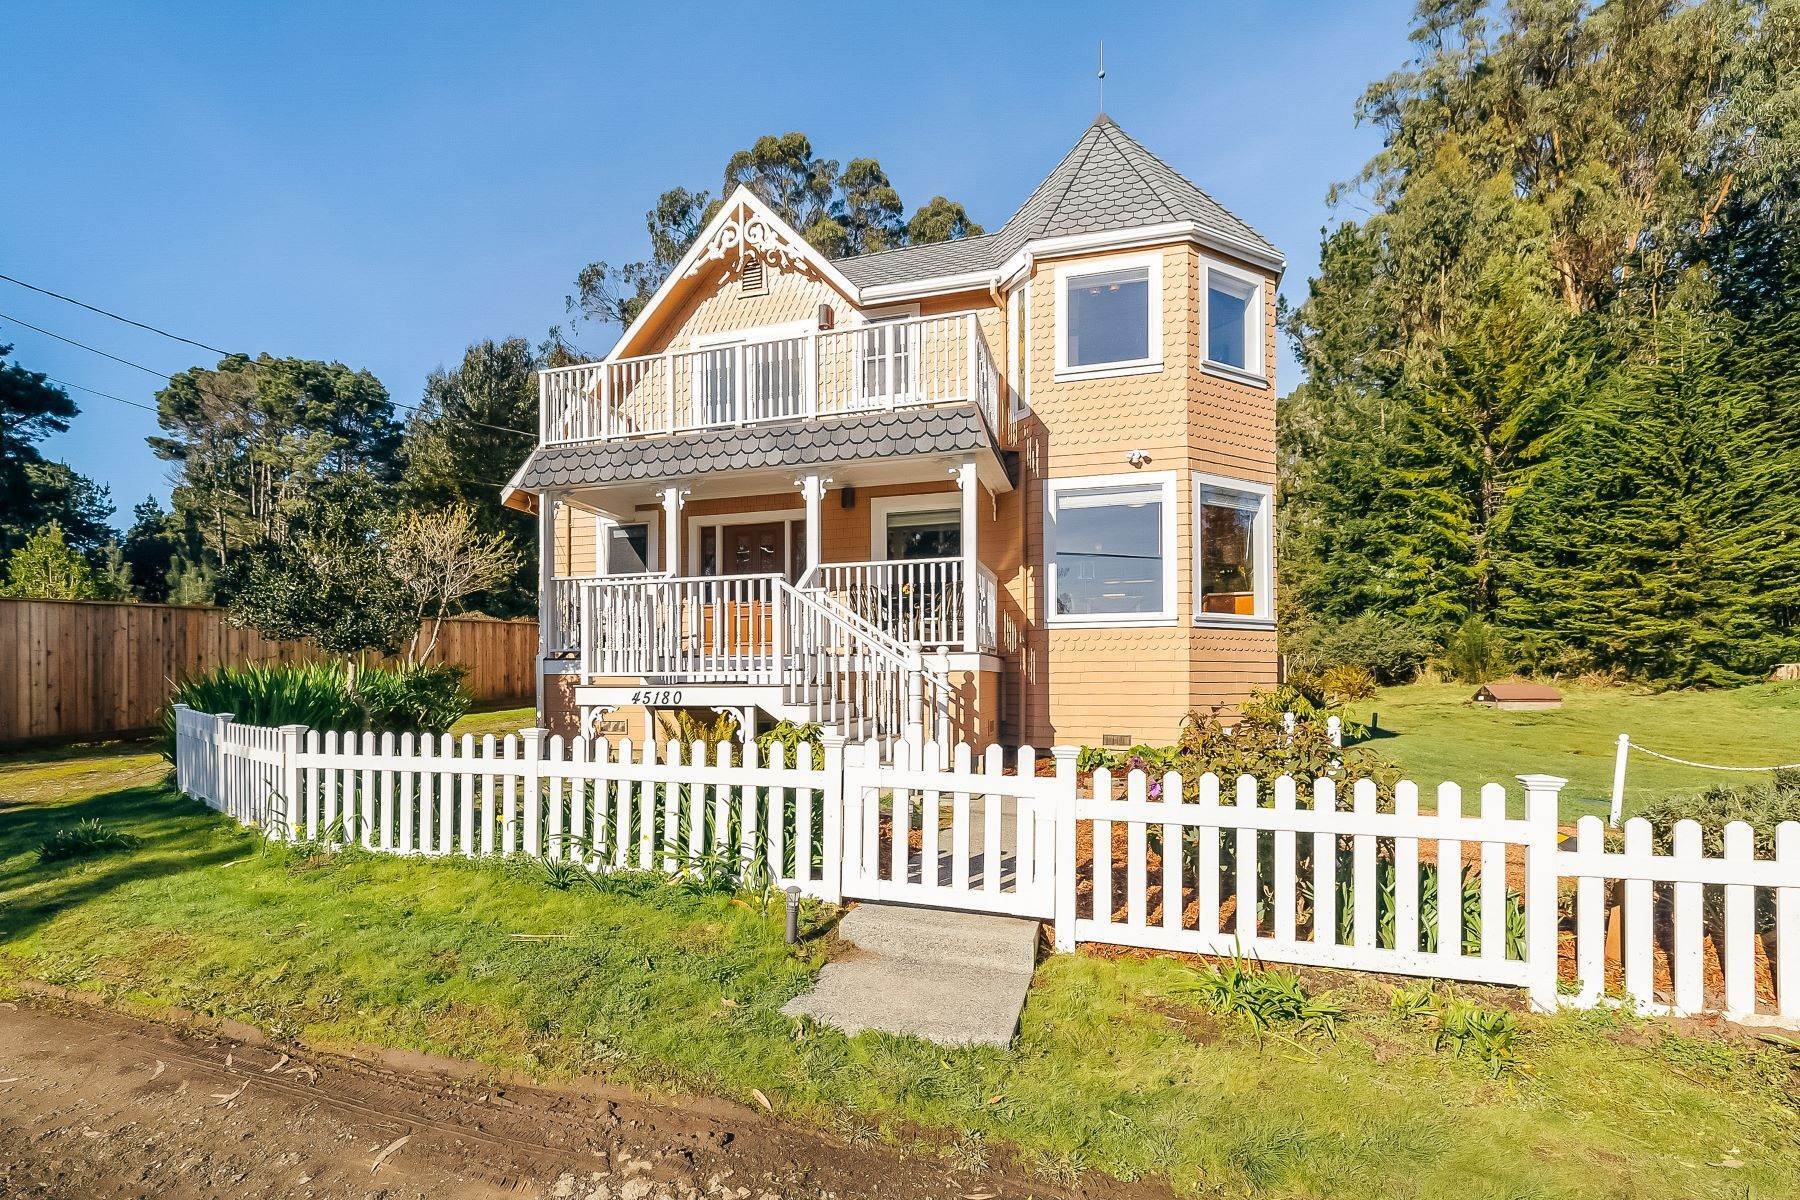 Property for Sale at Little River Victorian 45180 Headlands Drive Little River, California 95456 United States